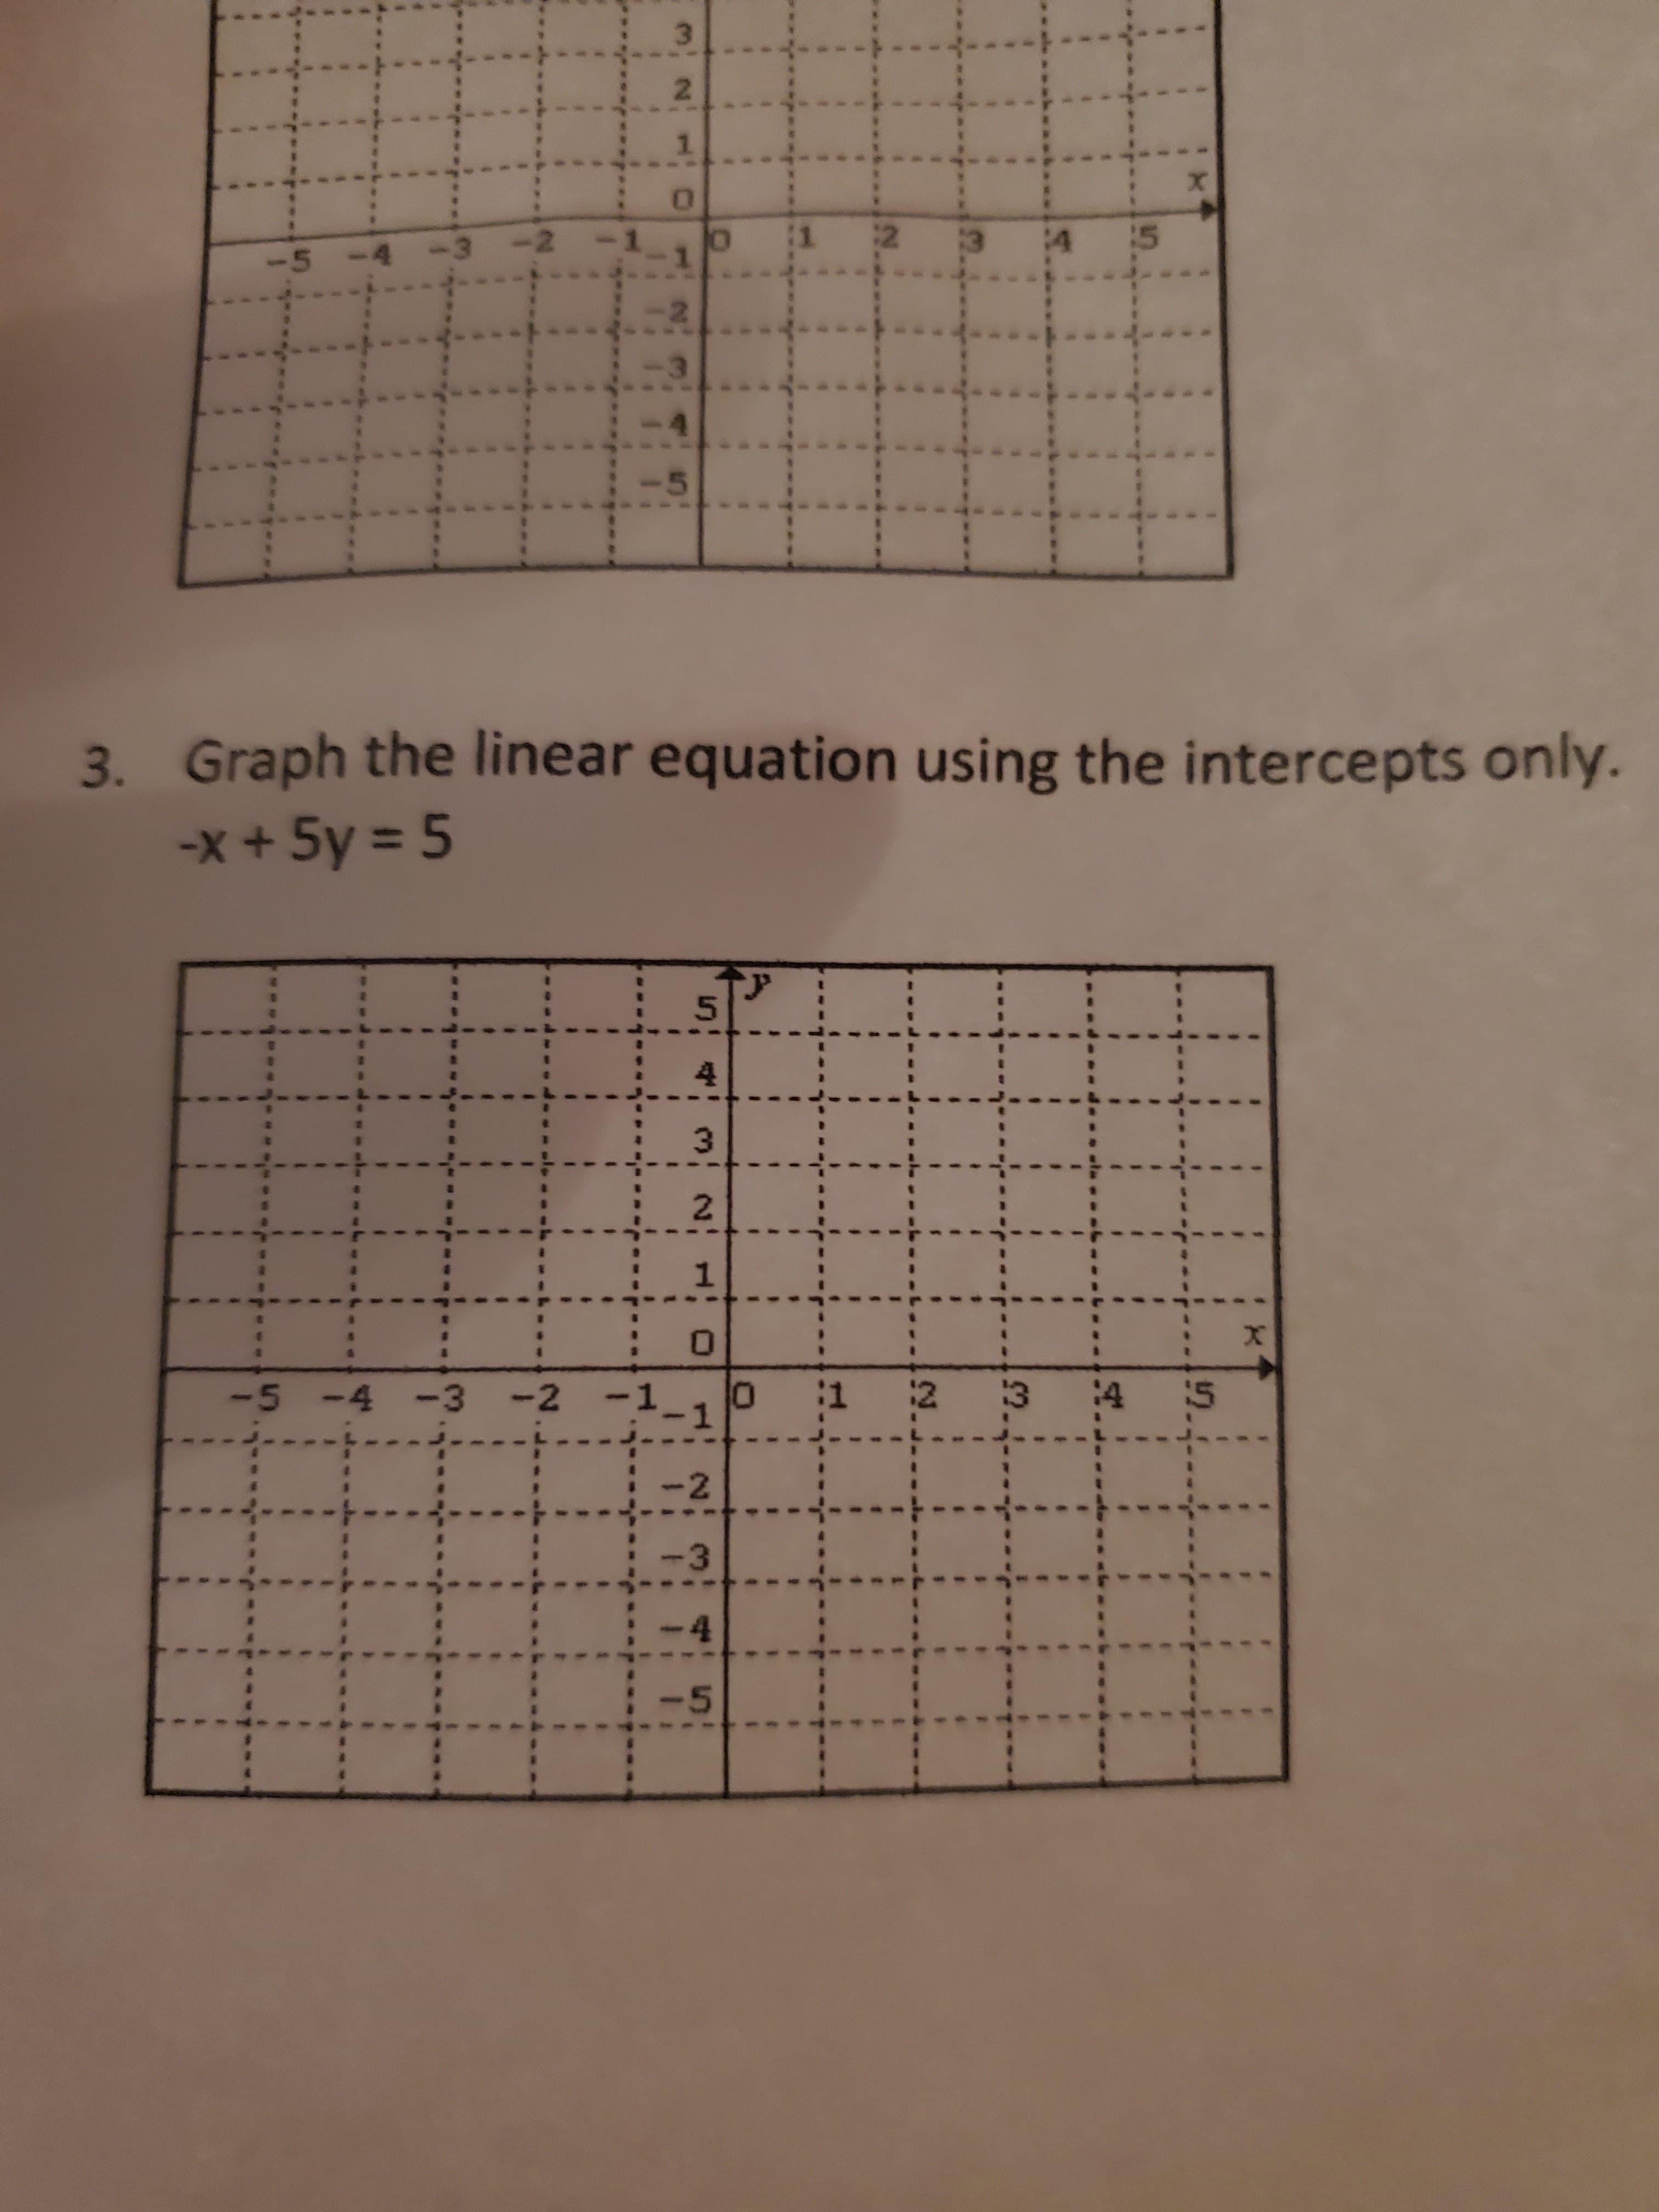 Graph the linear equation using the intercepts only.
-x+5y = 5
